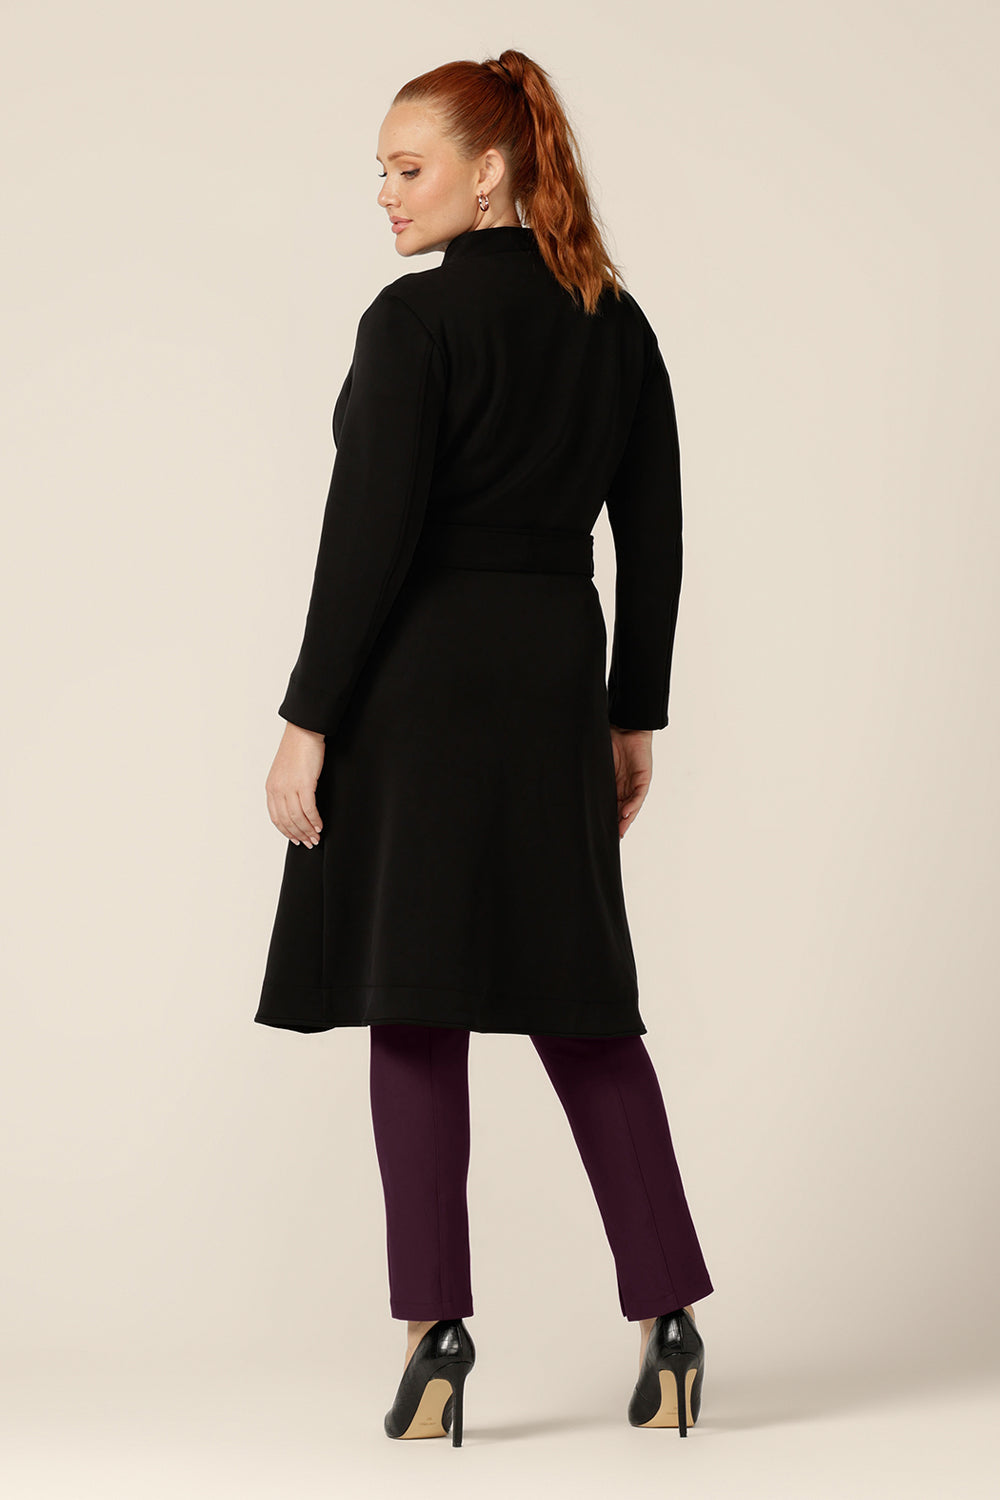 Great for chic city style, this black coat layers well for commuter workwear and travel. Shown as a back view and worn tied at the waist, this softly tailored black trenchcoat in modal fabric is made in Australia by Australian and New Zealand women's clothing label, L&F.